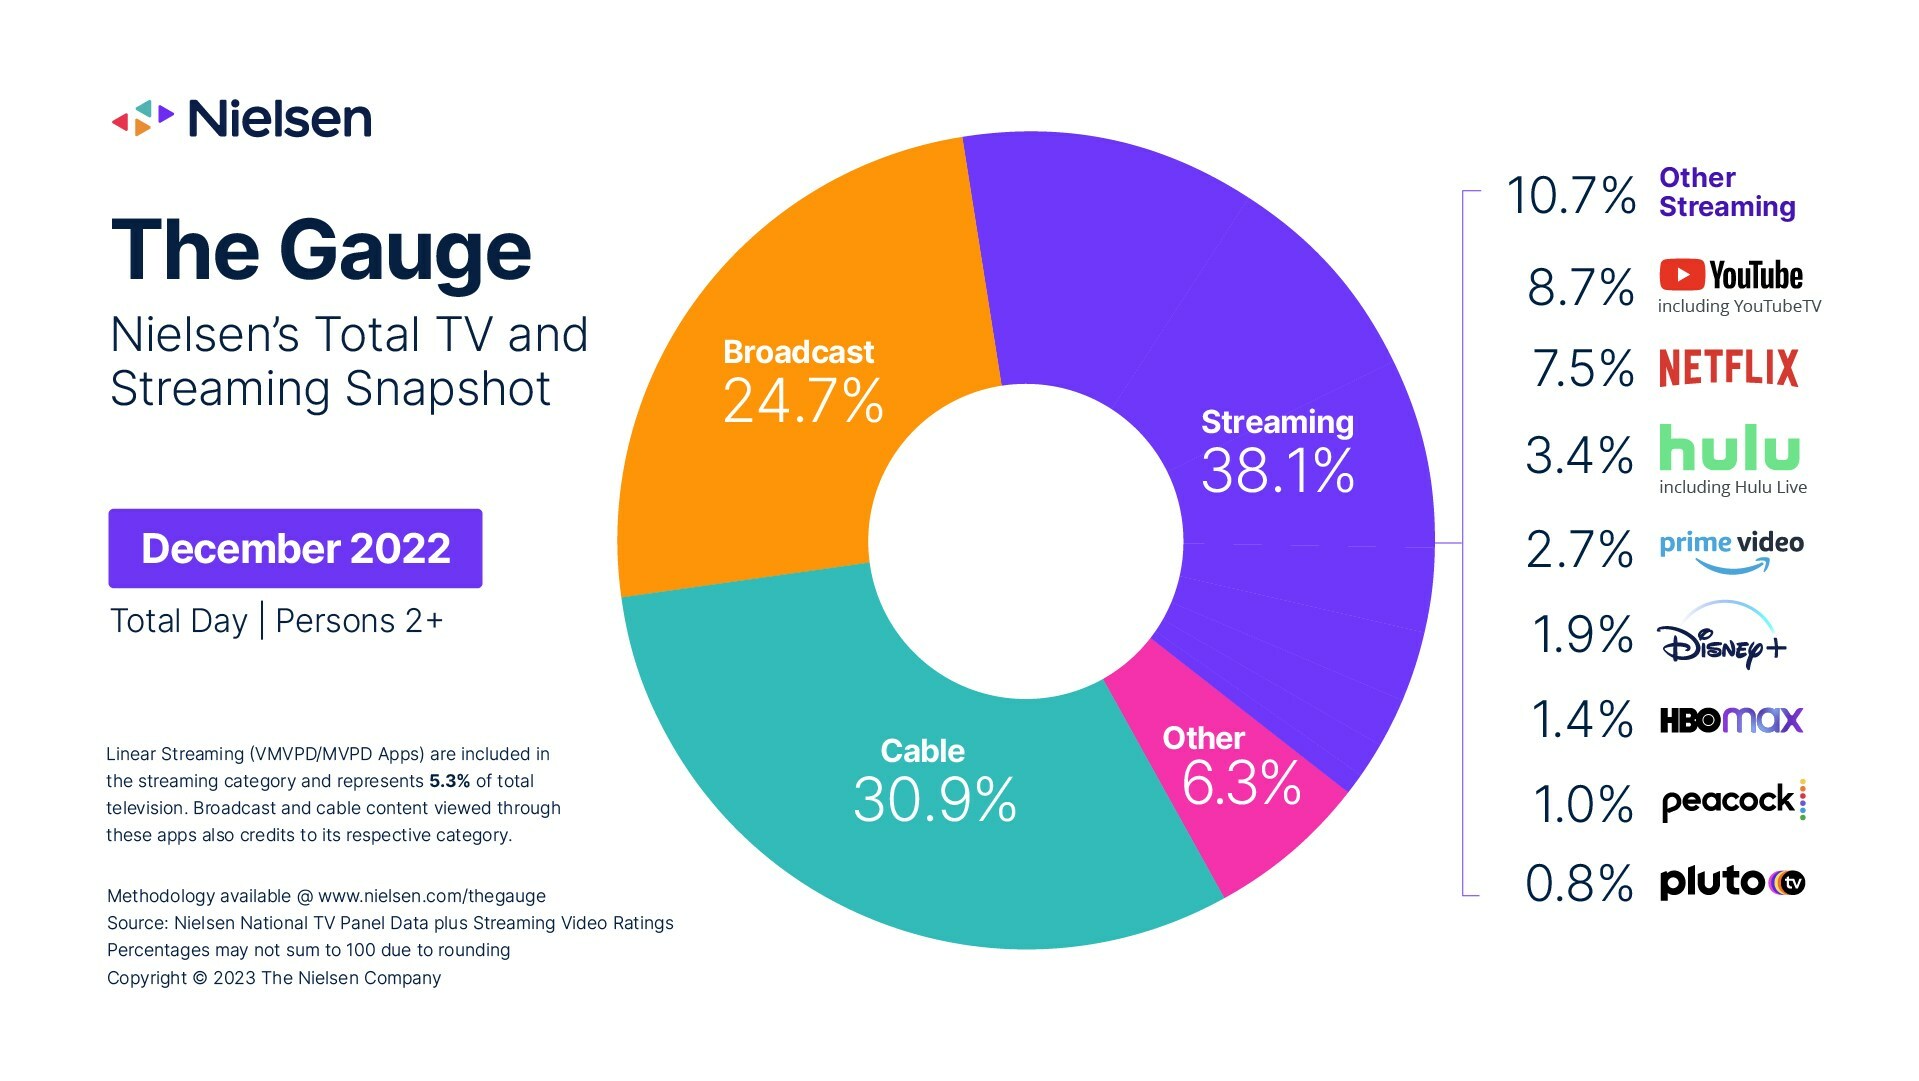 Nielsen The Gauge-TV and Streaming Snapshot - Streaming (YouTube, Netflix, Hulu, Amazon Prime Video, Disney+, HBOMax, Peacock, Pluto TV), Cable TV, Broadcast, Other - US - December 2022